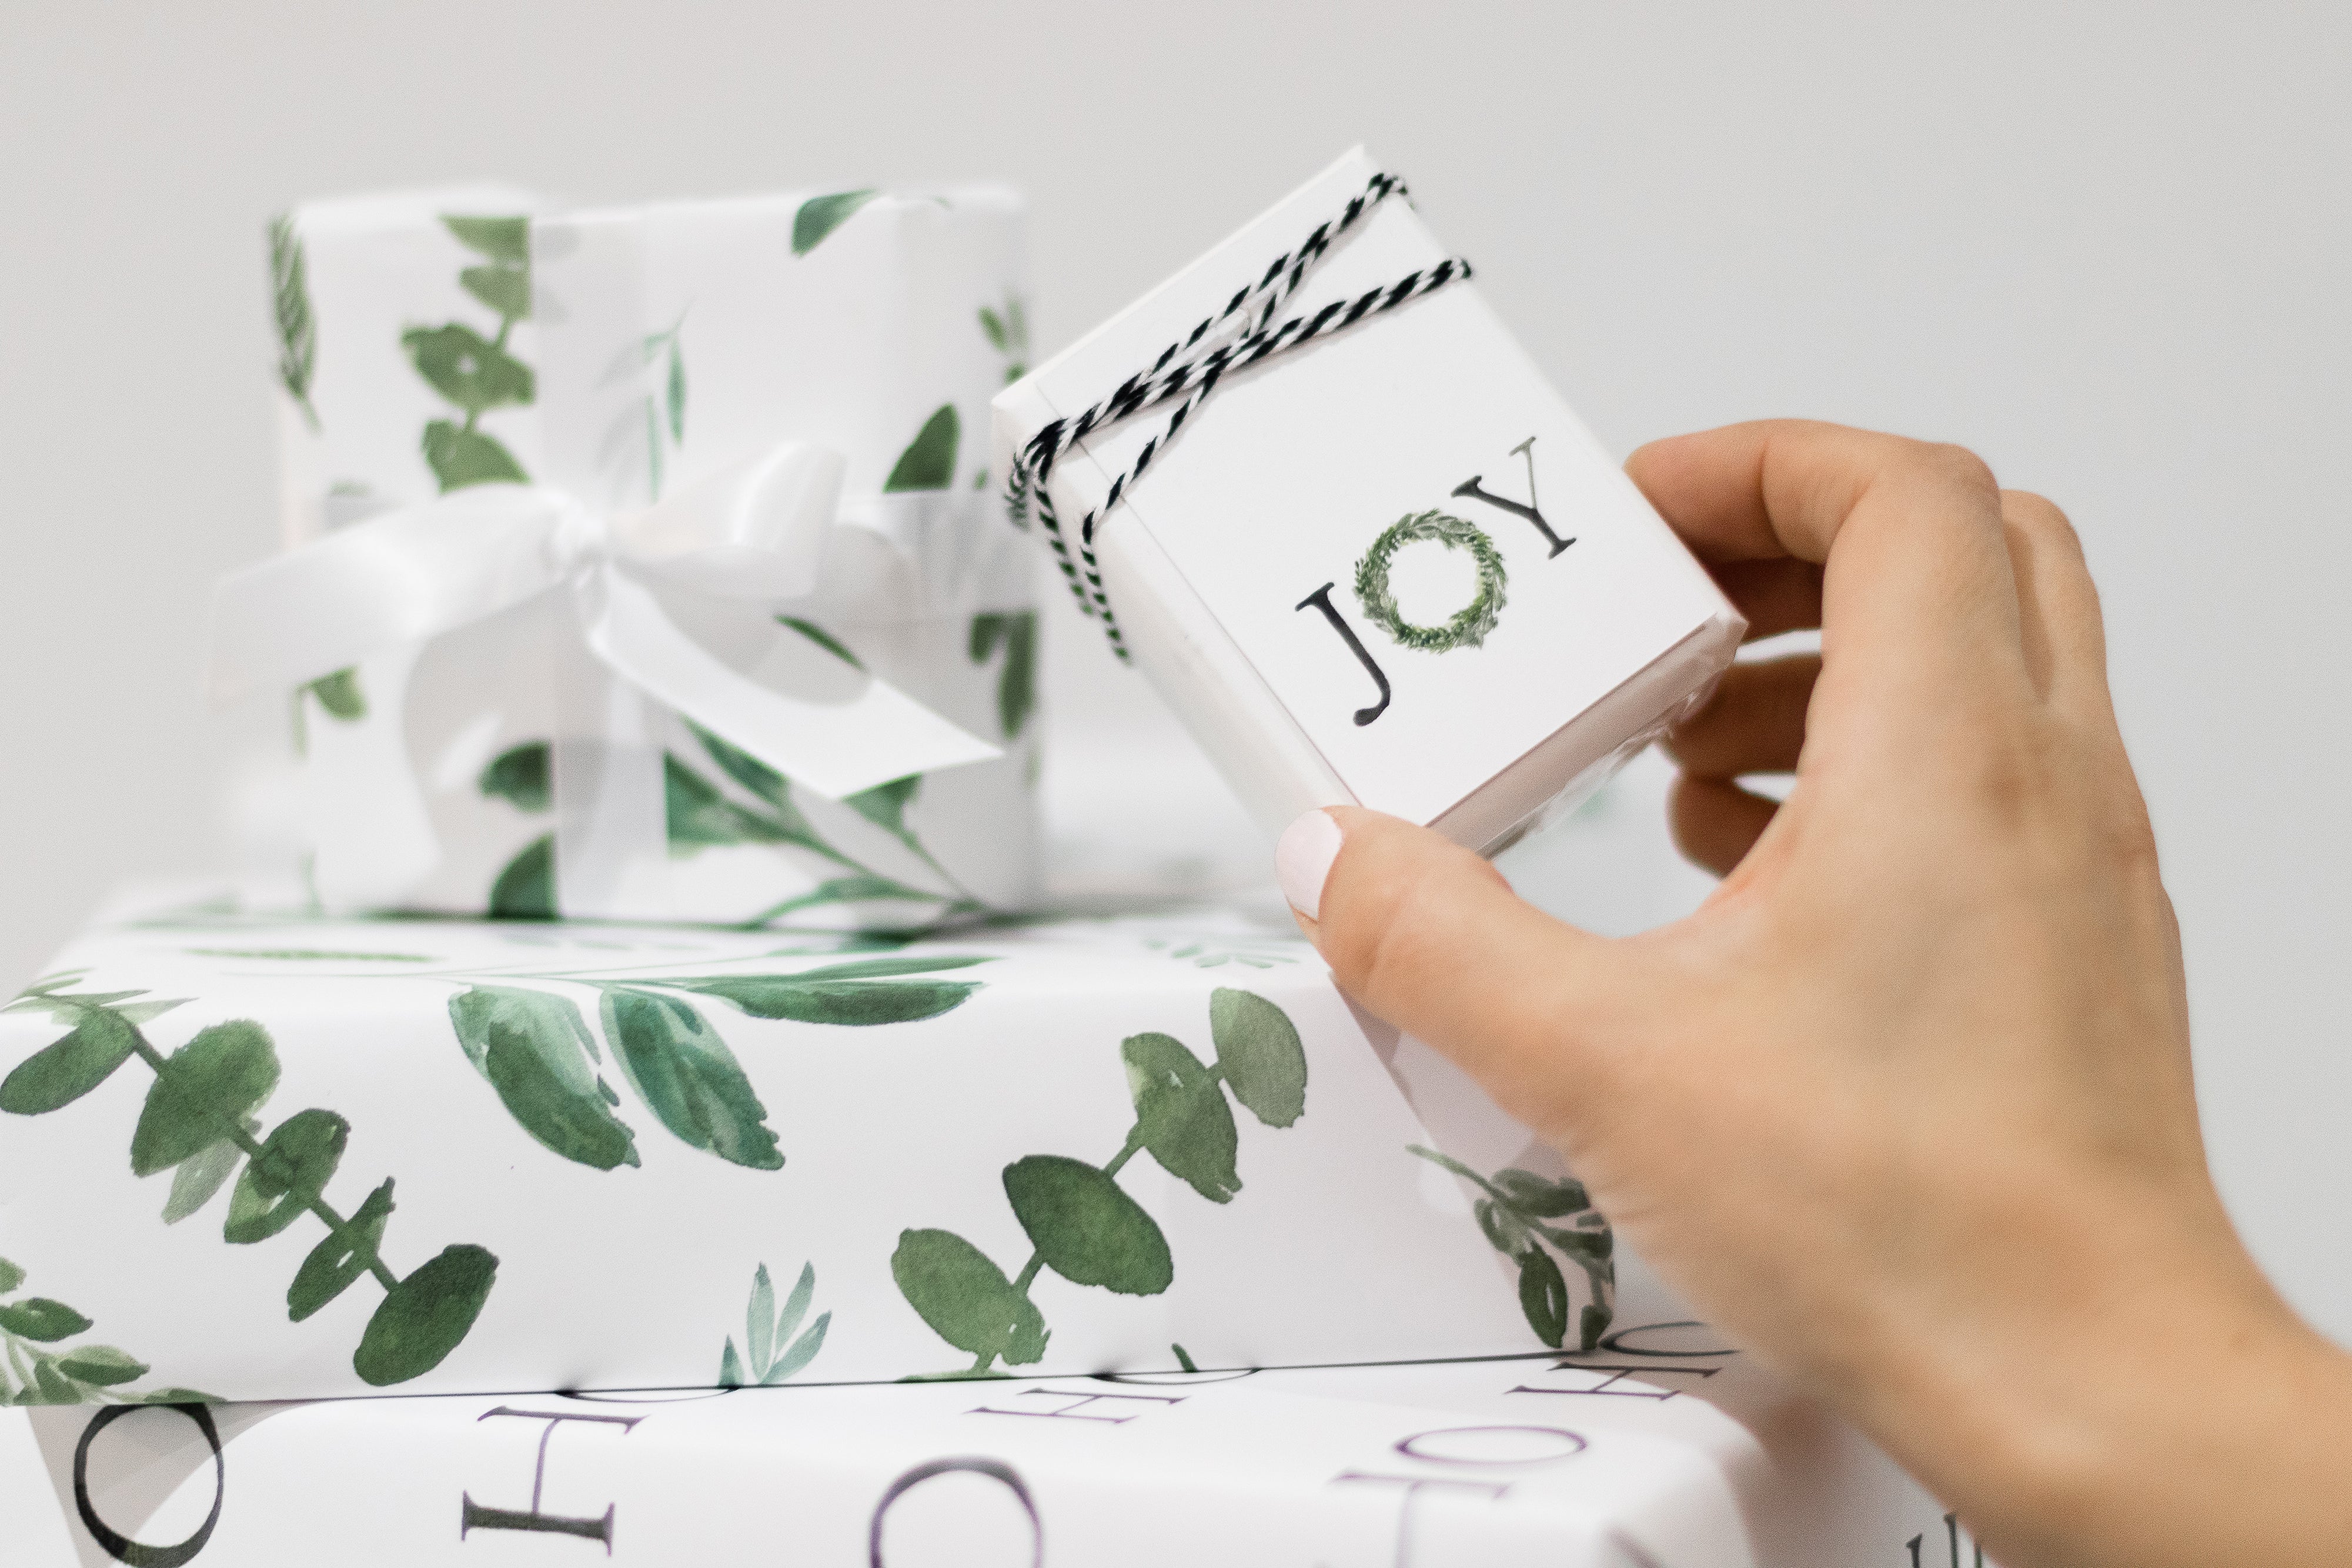 Wrapping Paper | Loose Greenery